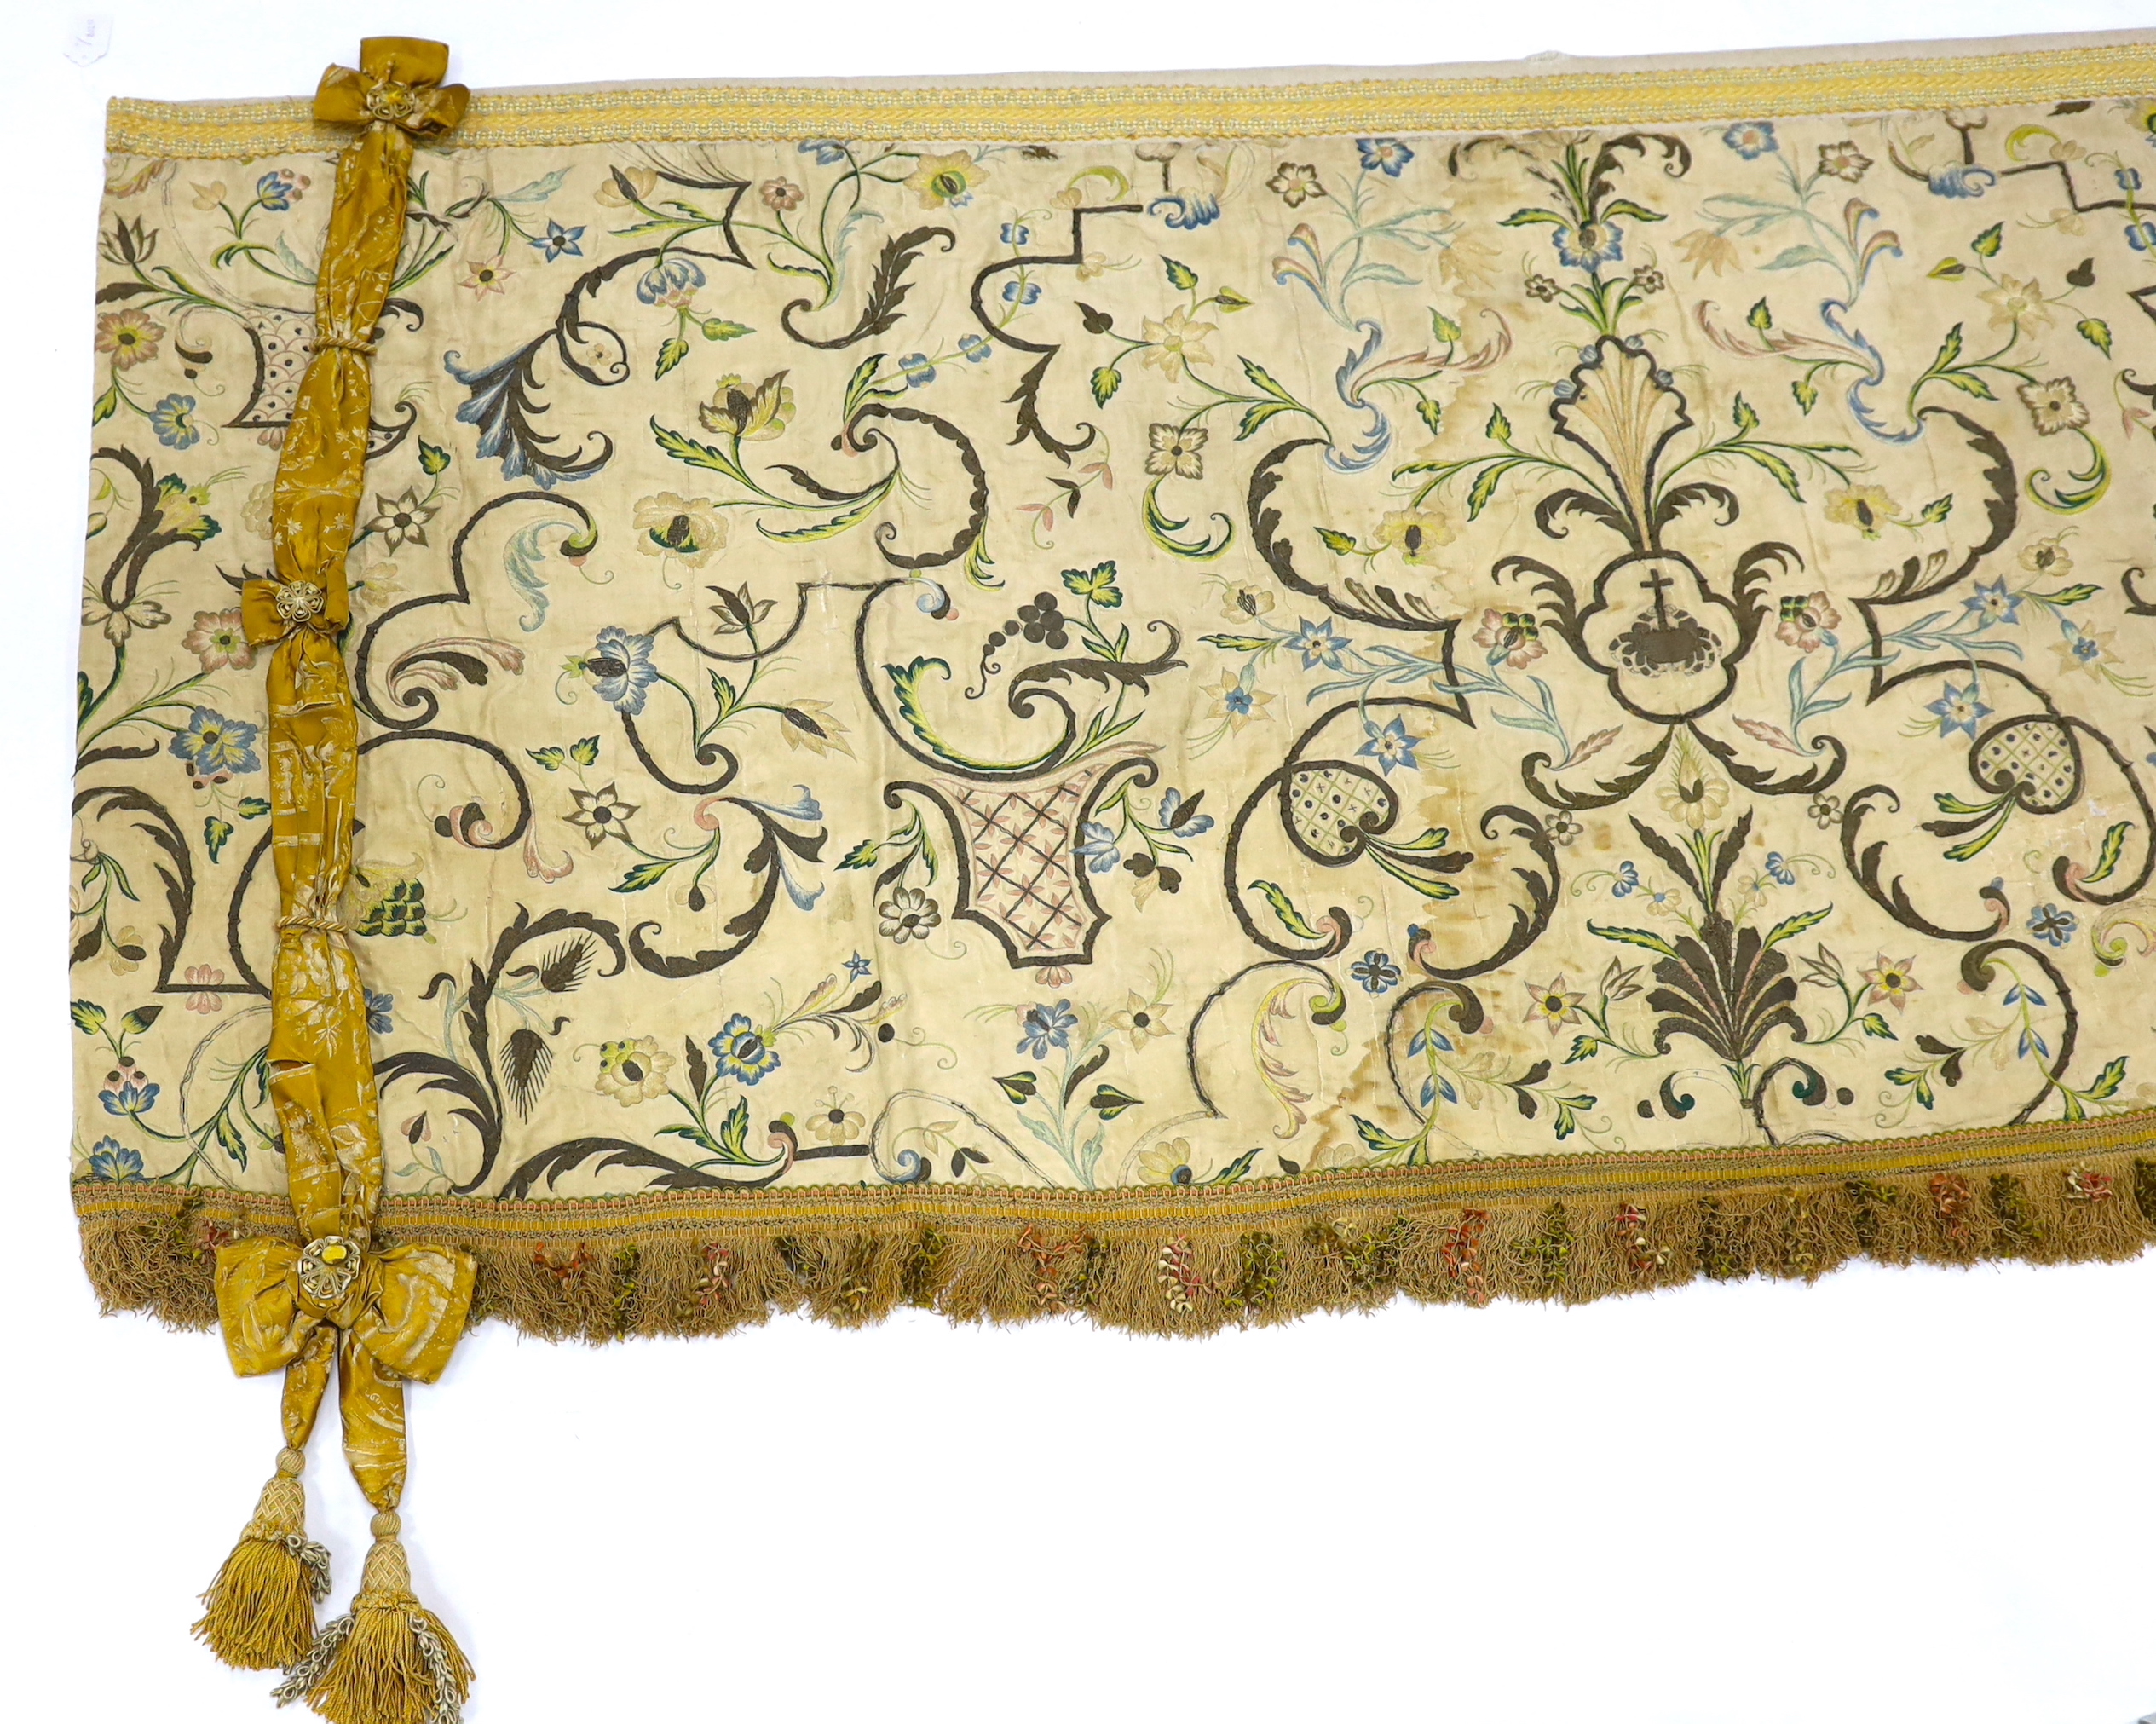 A mid-18th century Continental silk embroidered altar cloth, embroidered with polychrome silks and silver metallic threads in an all-over floral design on cream silk with ornate silk tasselling, (the damask tie backs add